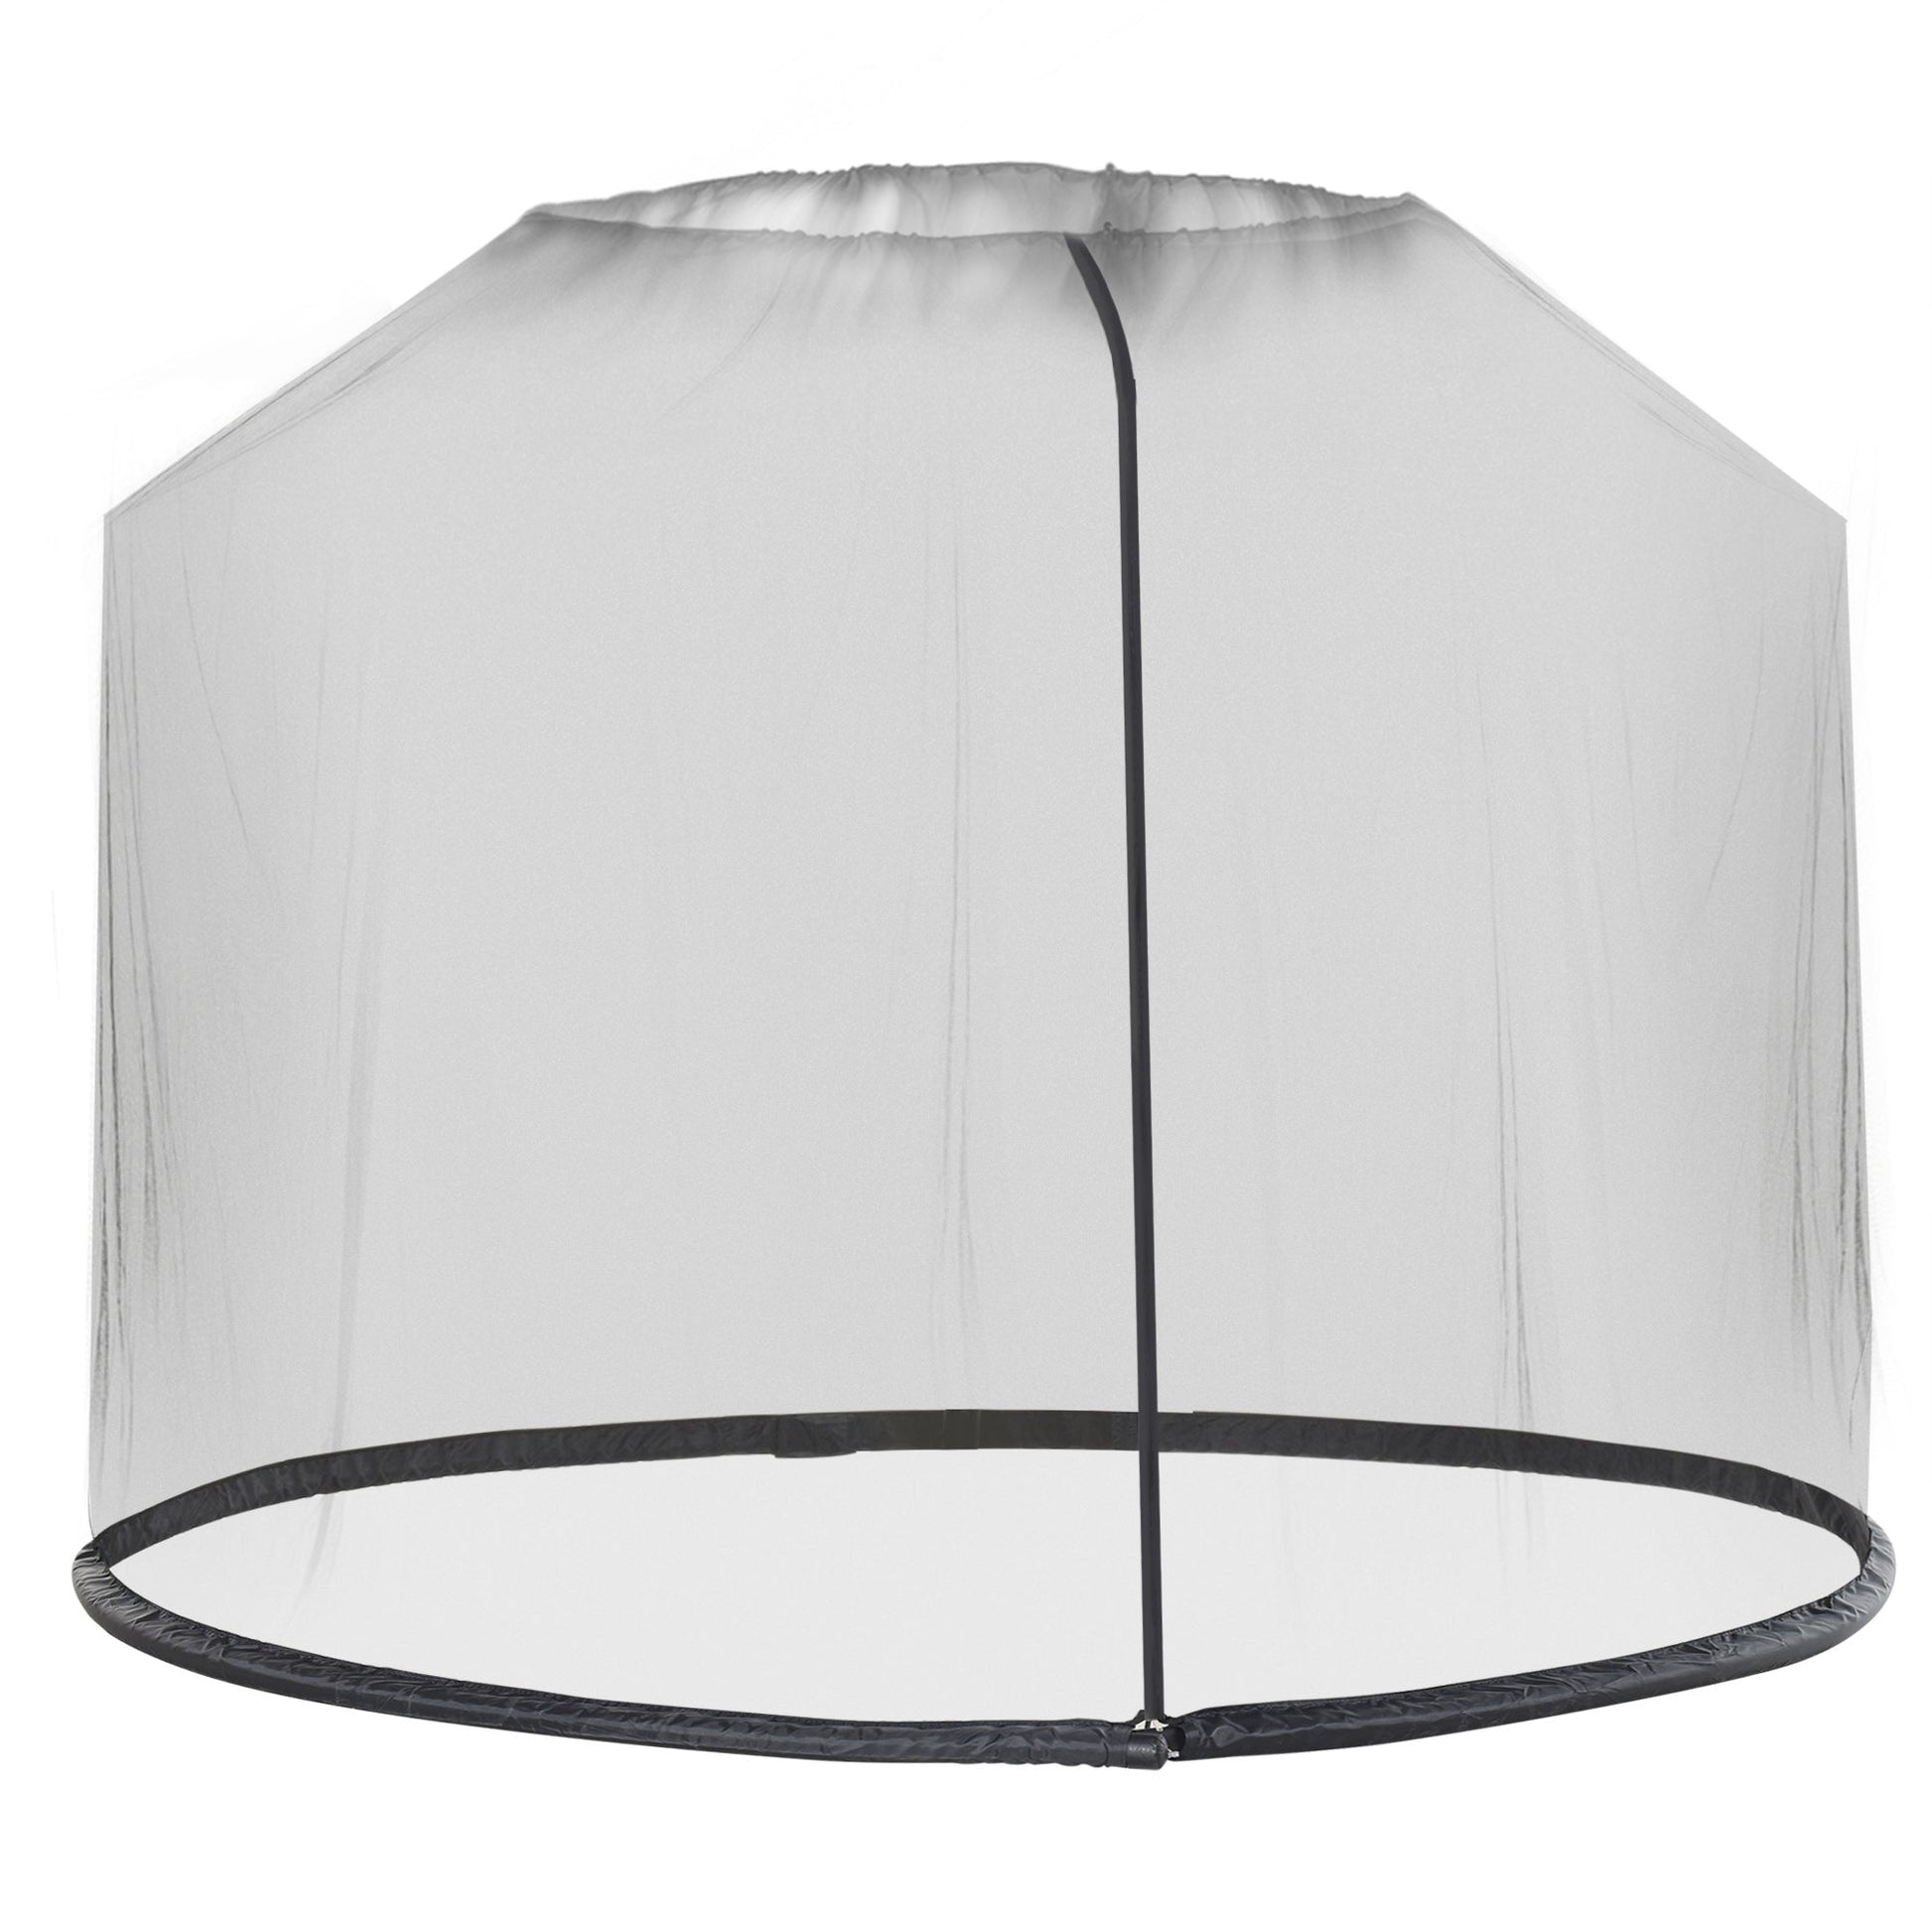 Outdoor Patio 7.5ft Umbrella Table Screen Mosquito Bug Net Garden Large Umbrella Cover Netting with Zippered Door, Black (Mosquito Netting ONLY) at Gallery Canada